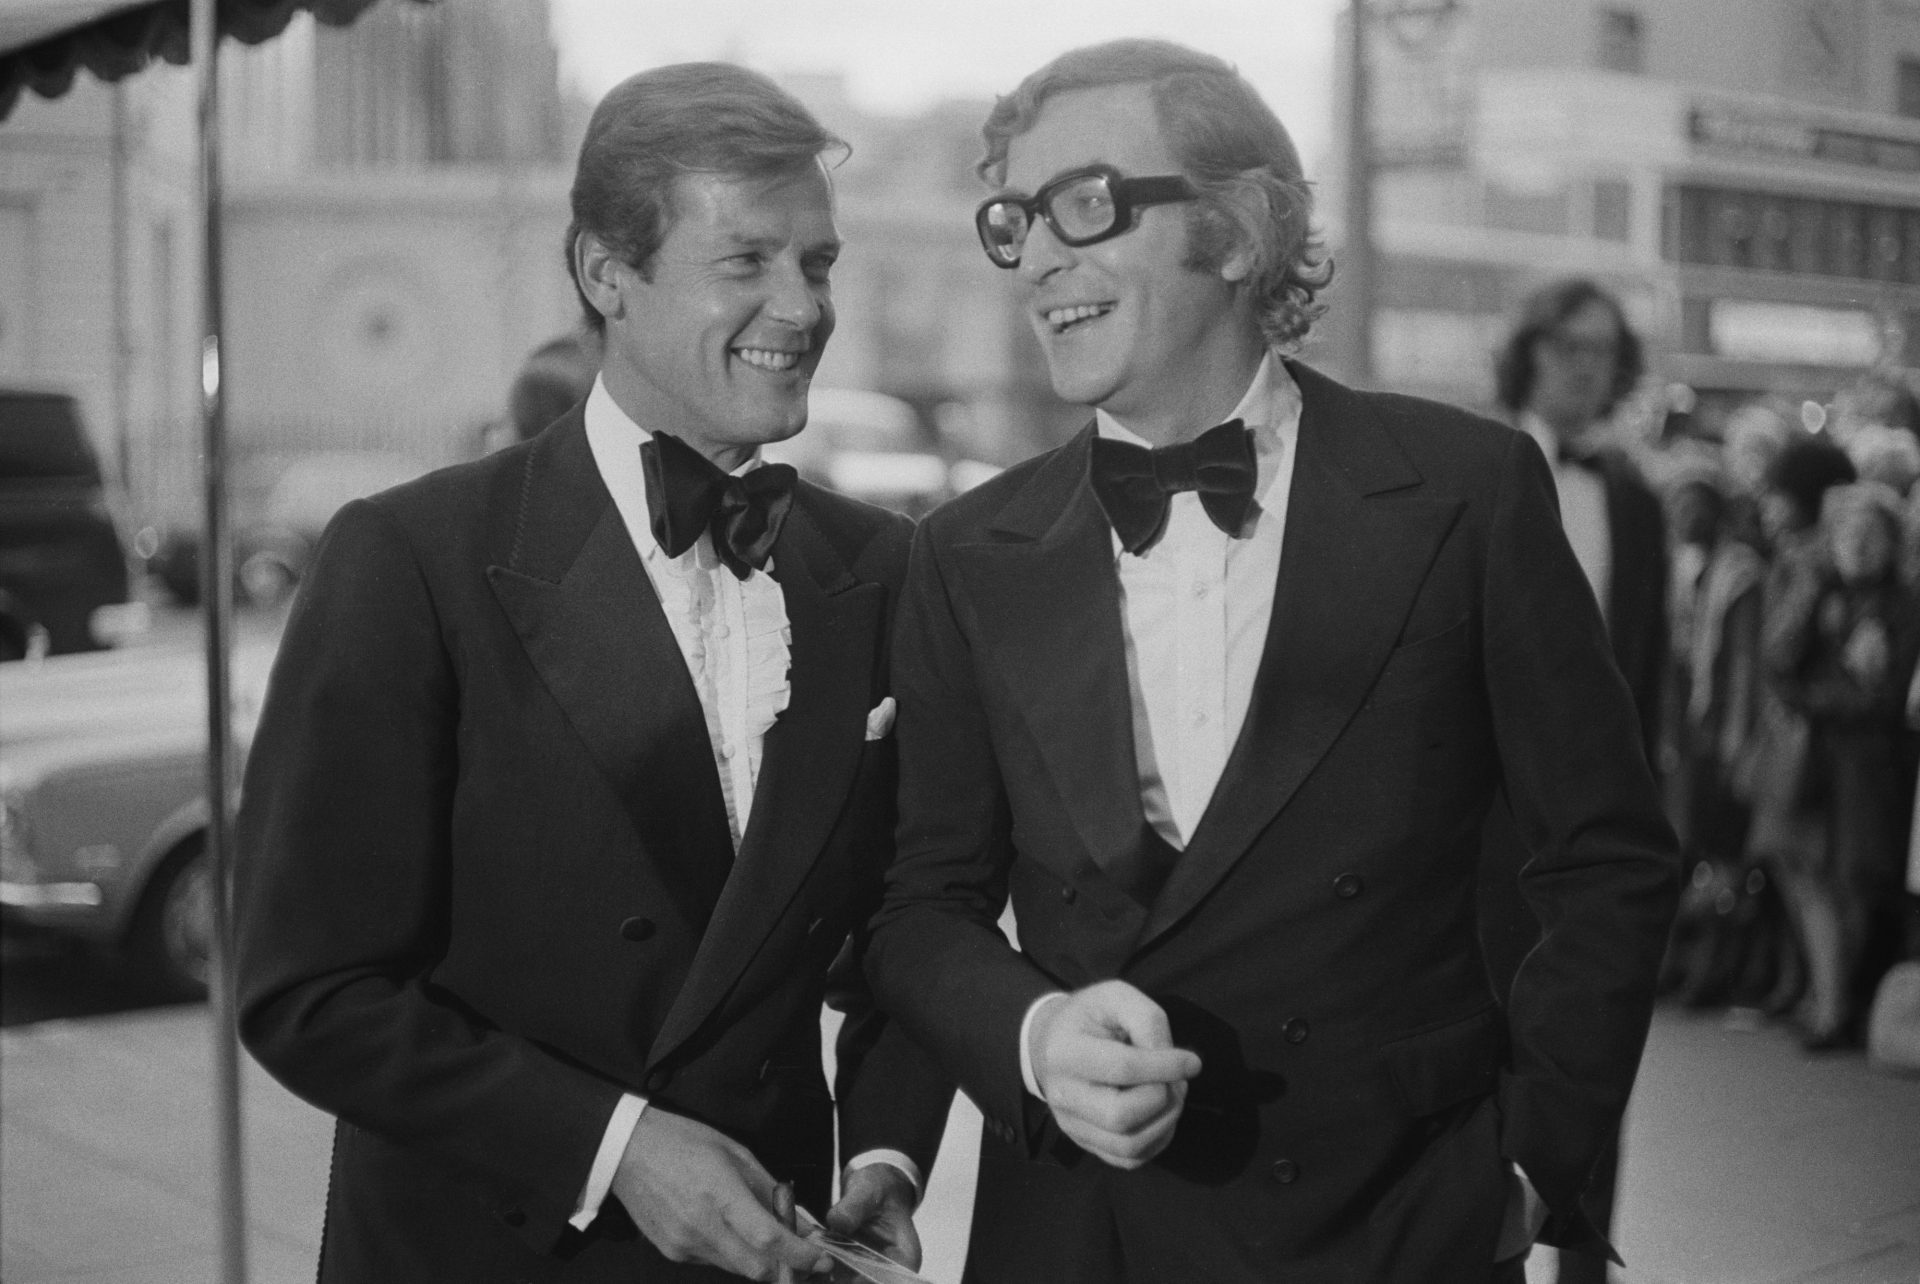 Roger Moore
and Michael
Caine attend
the premiere
of Sleuth at
the Odeon
near Marble
Arch, May
1973. Credit: M. Stroud/Daily Express/Hulton Archive/Getty Images